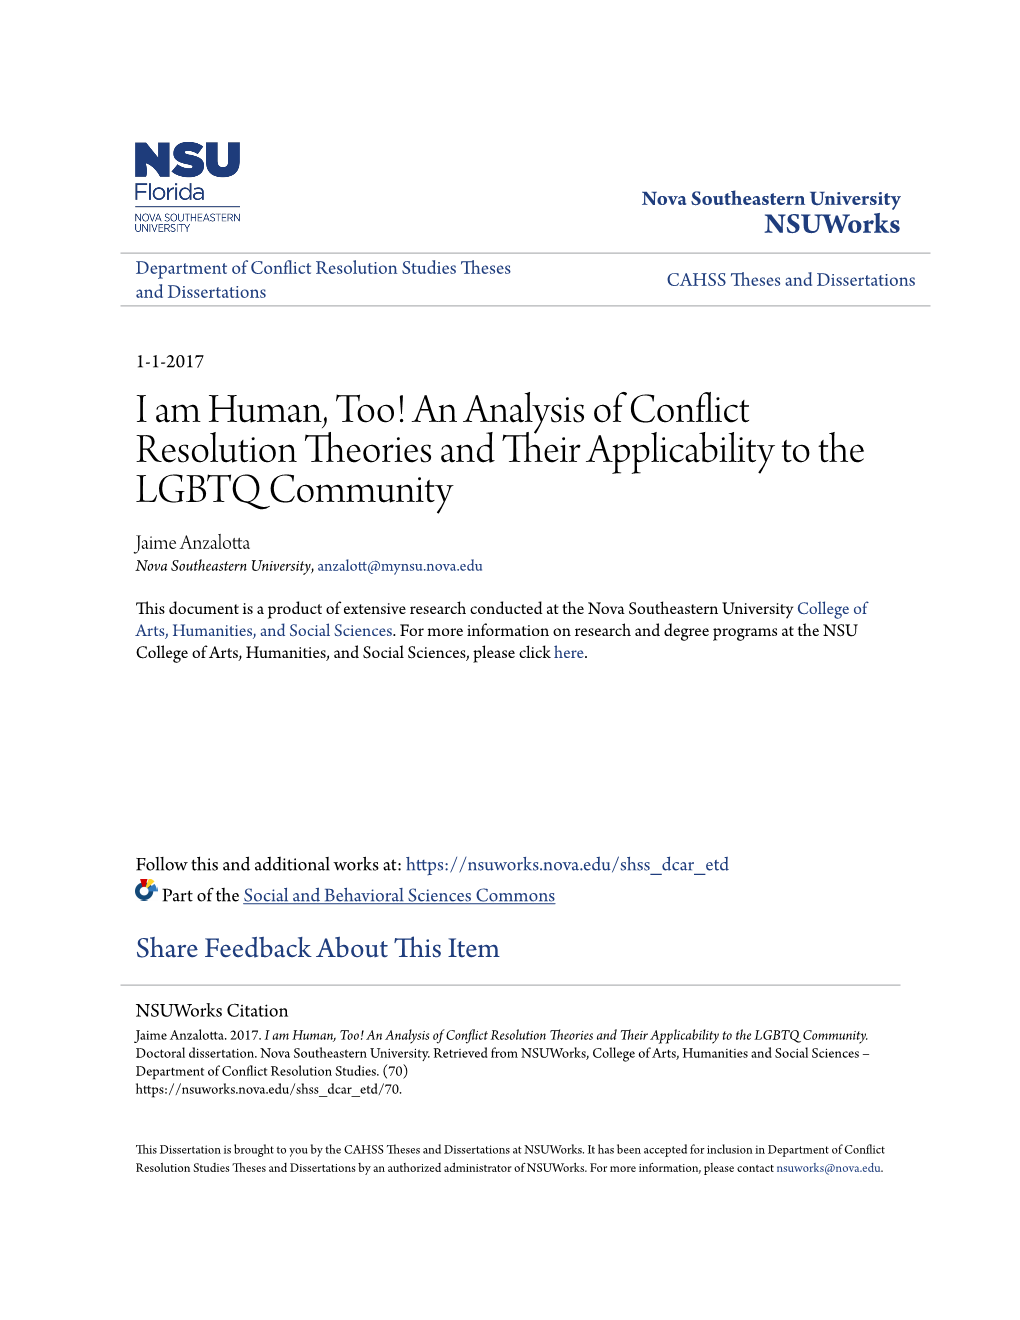 I Am Human, Too! an Analysis of Conflict Resolution Theories And